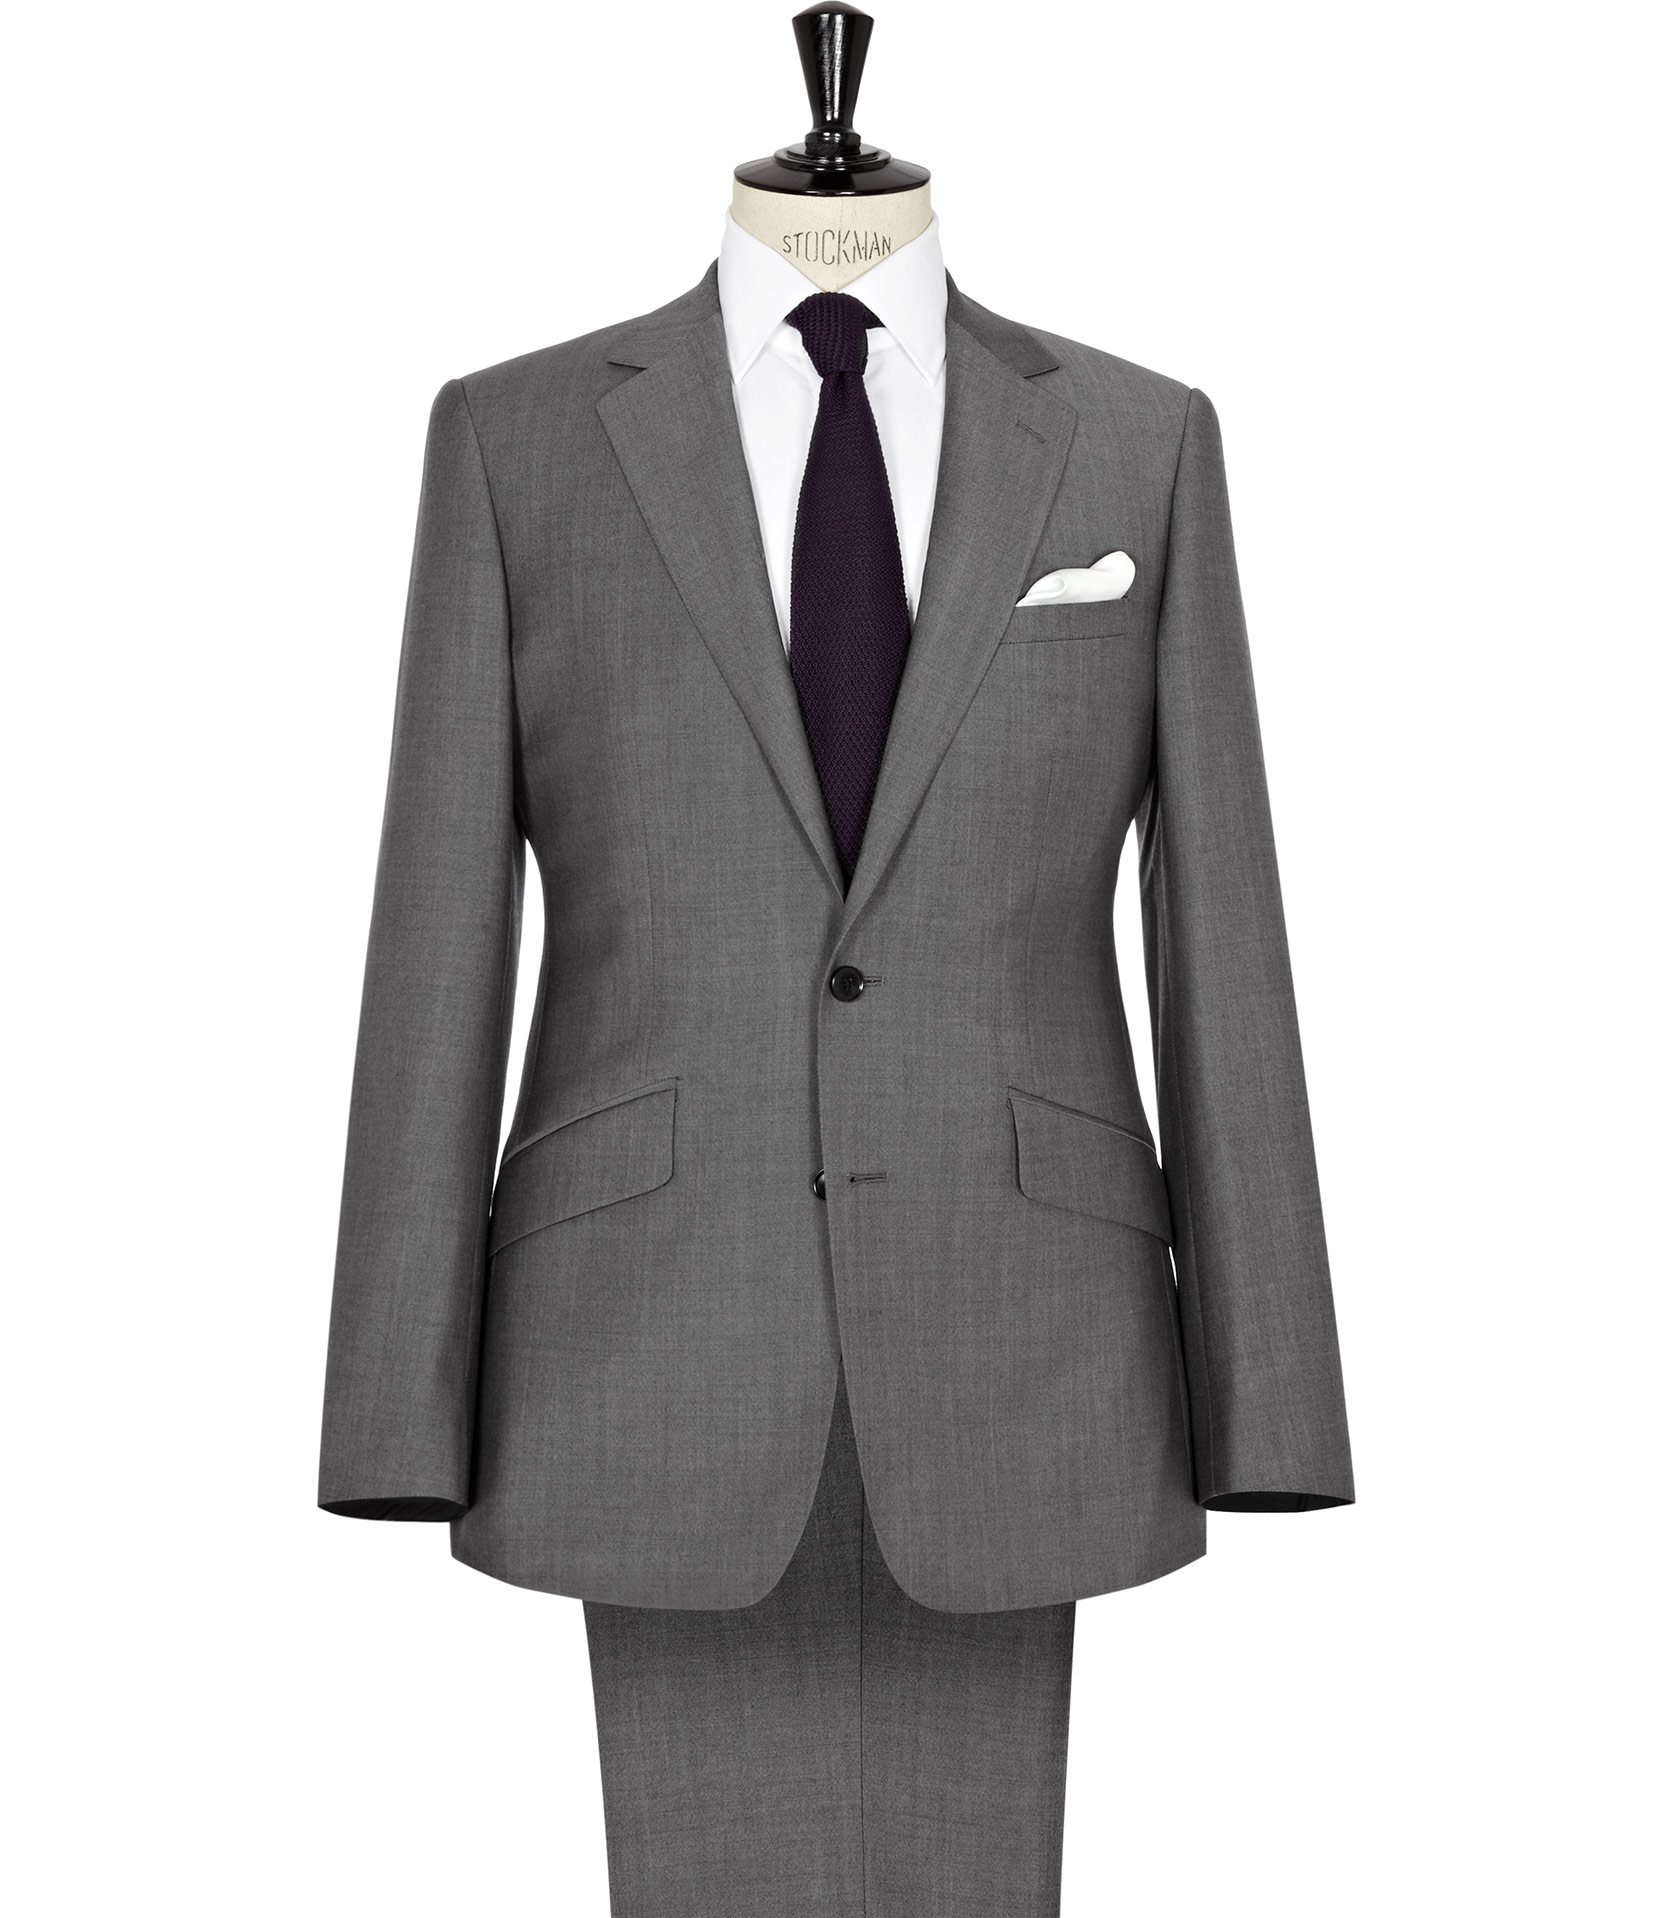 Lyst - Reiss Florence Two Button Wool Mohair Suit in Gray for Men